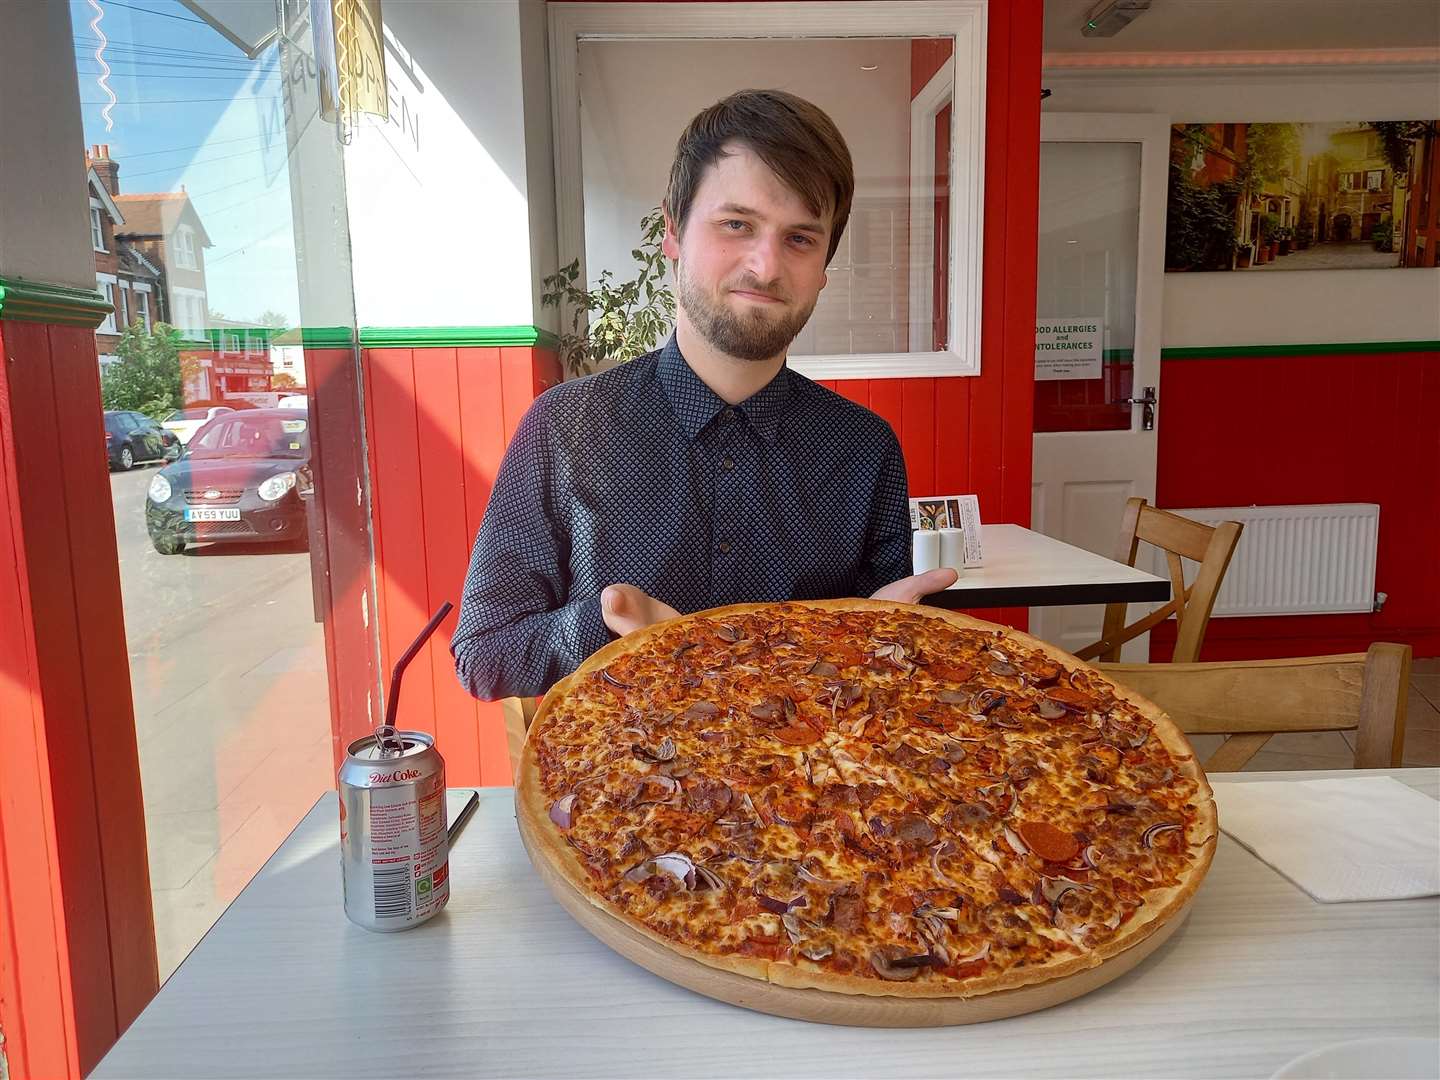 The 20 inch Big Boys Special pizza